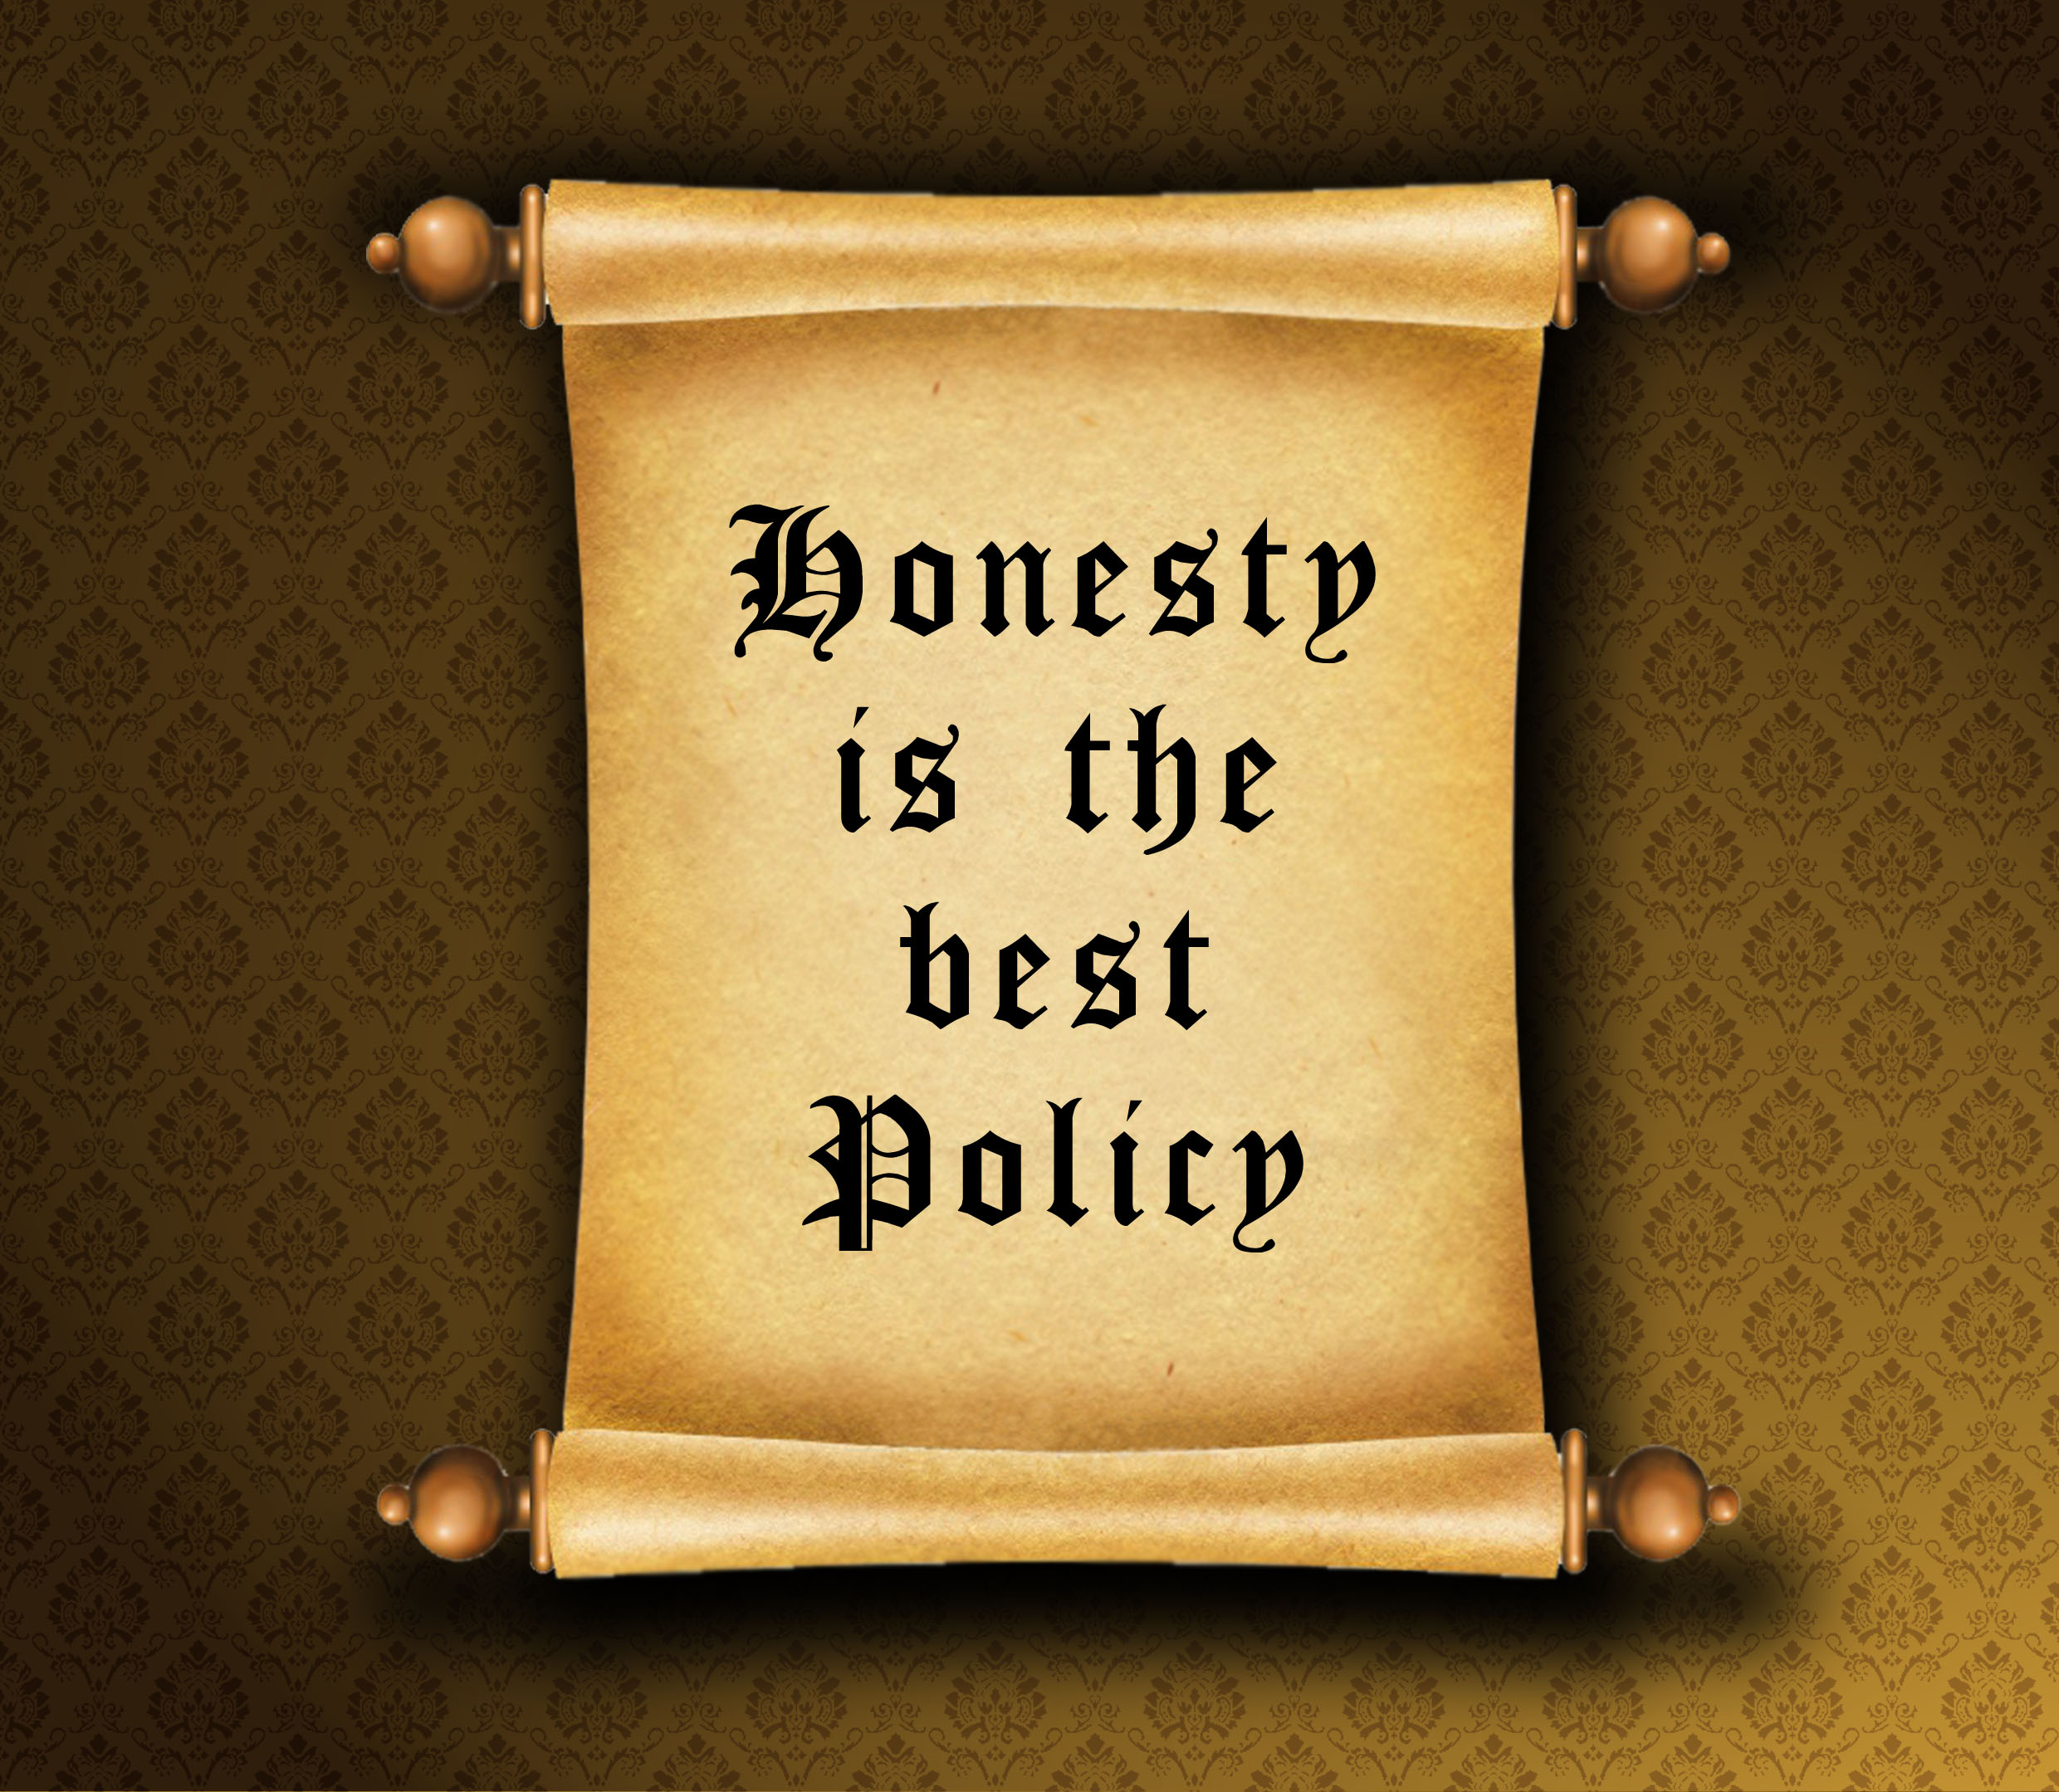 Is honesty the best policy essay 1984